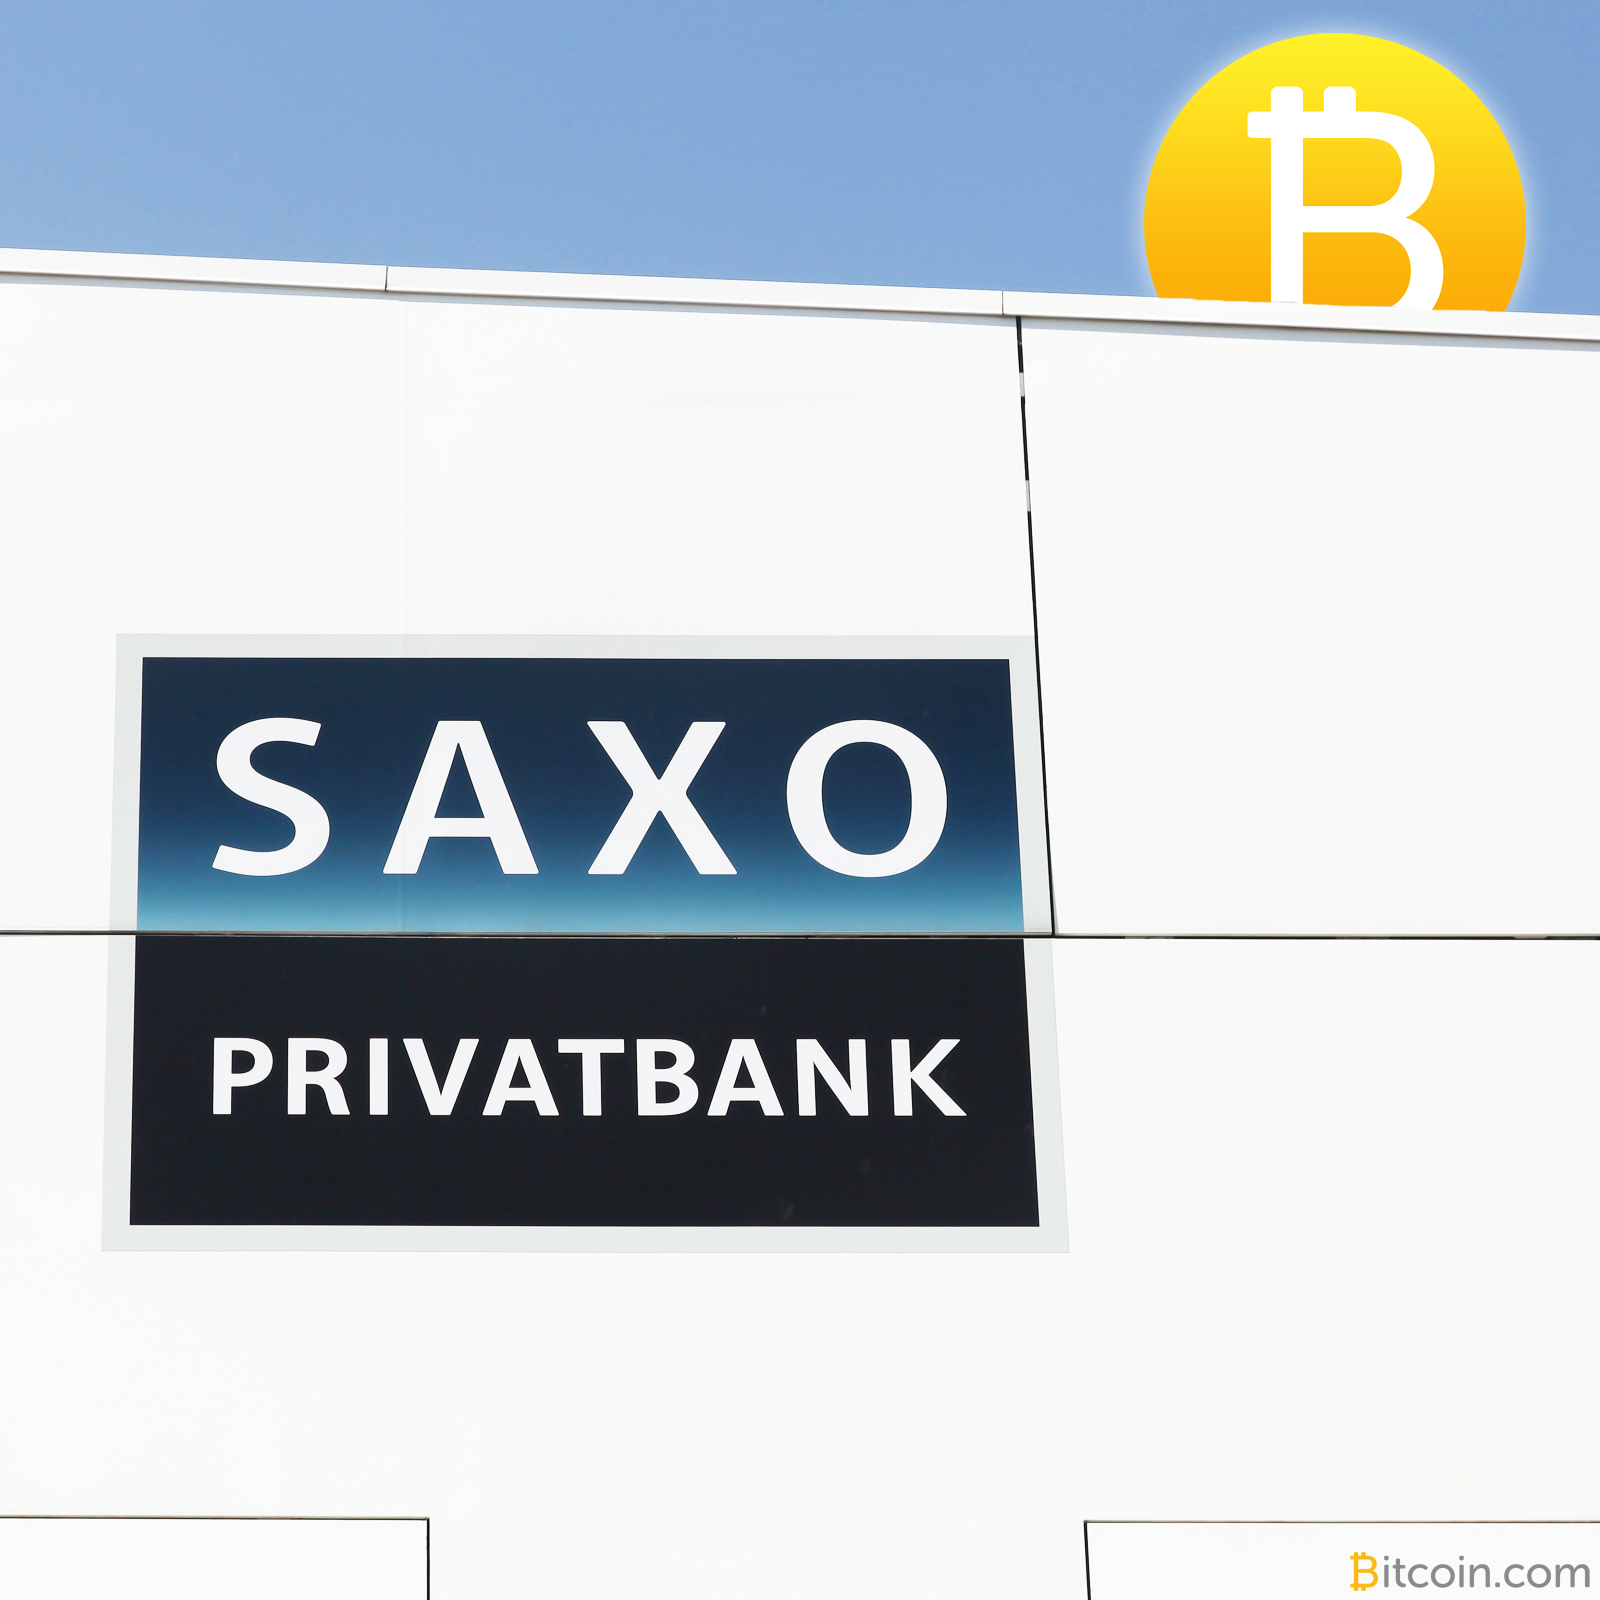 Saxo Bank Founder Lars Christensen Is Waiting for a Cryptocurrency Panic Sell-Off